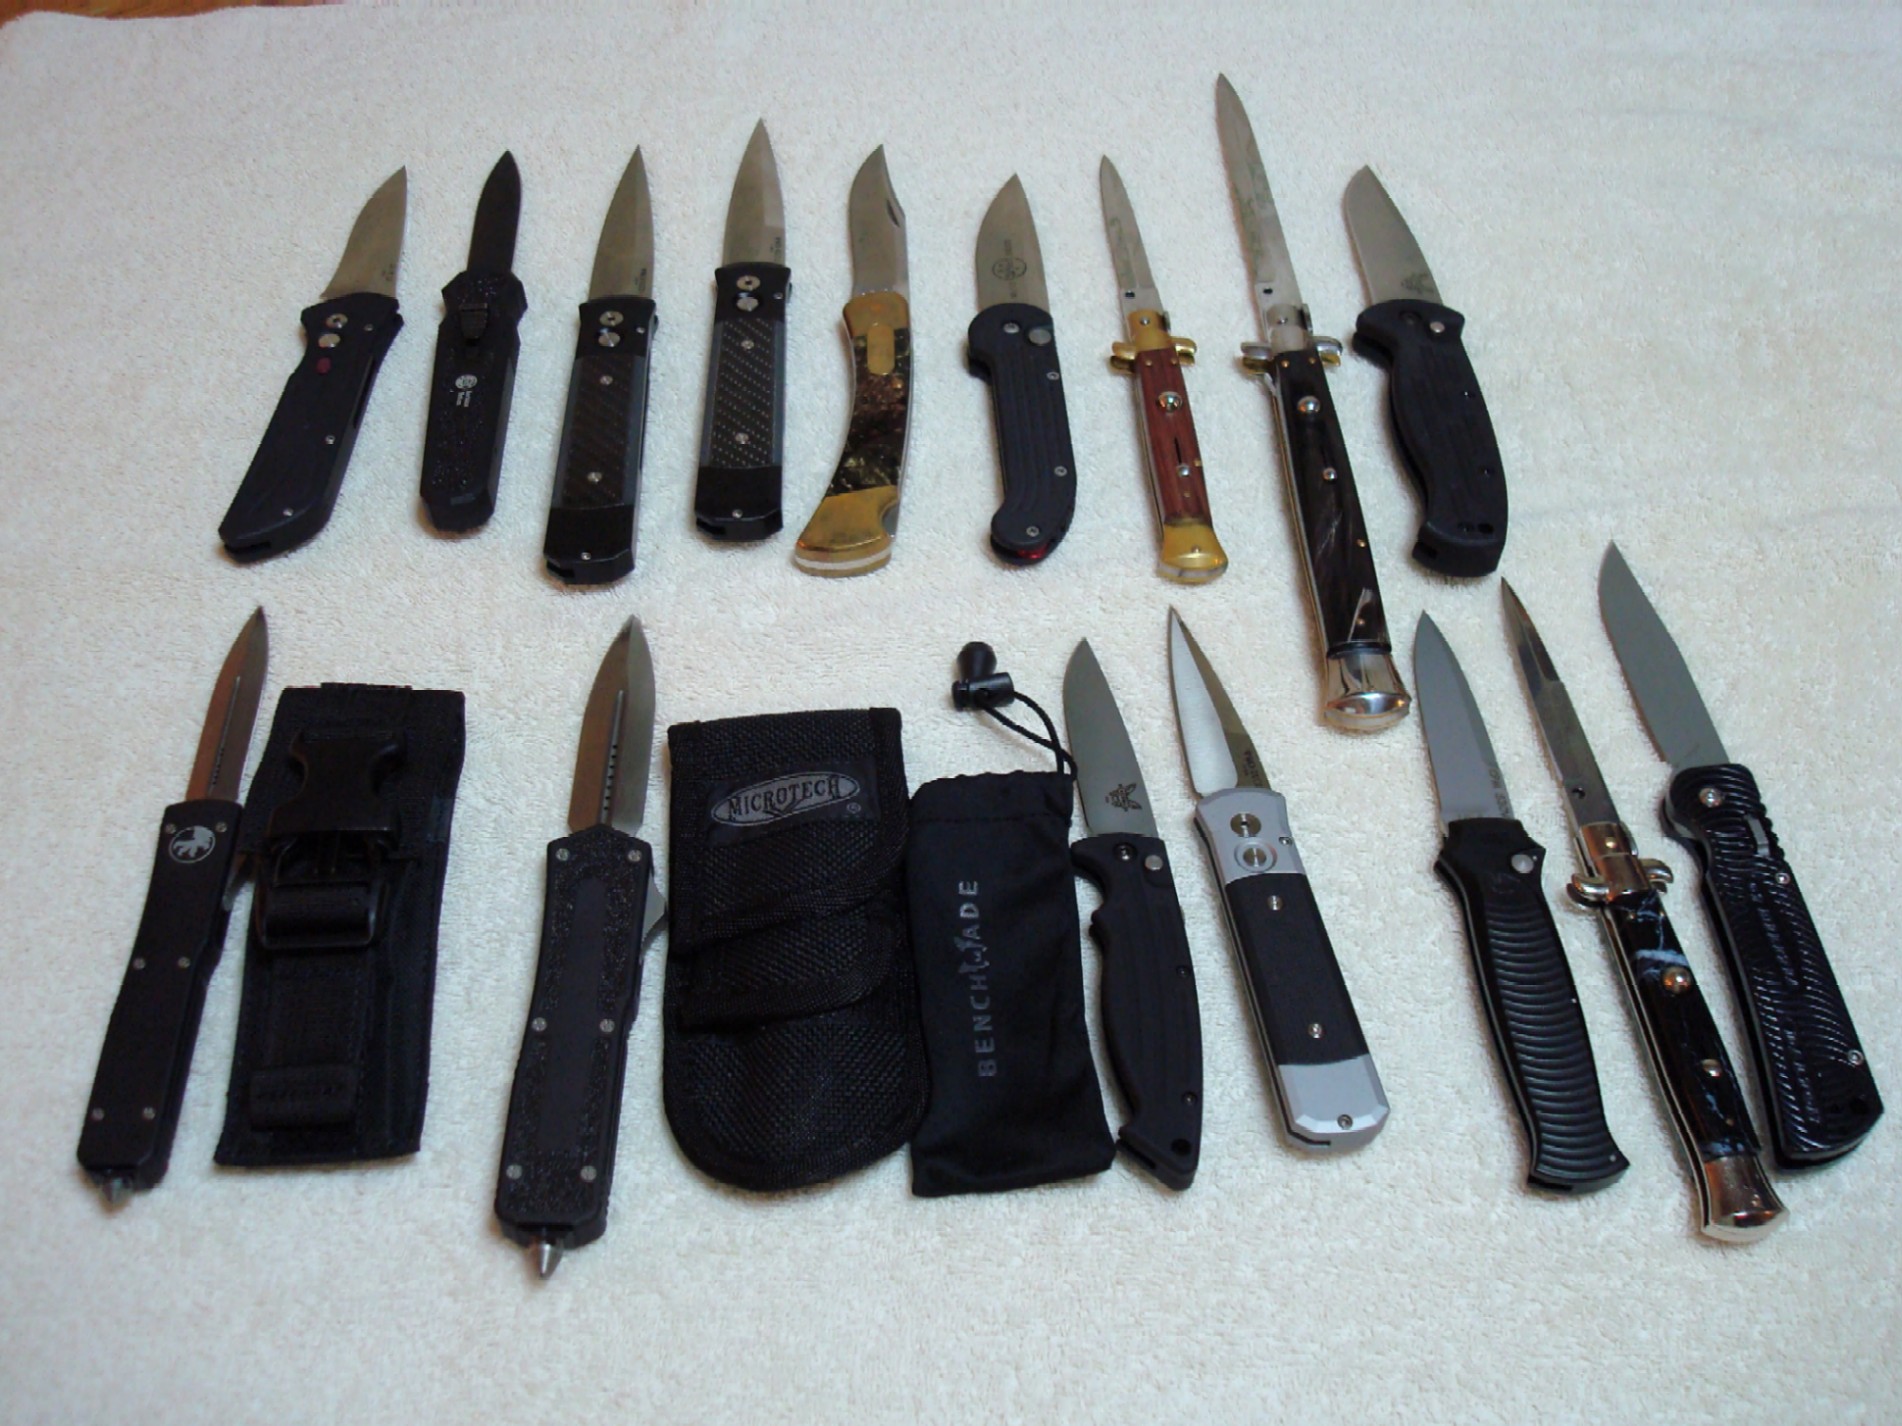 Knives with some cases 1.JPG